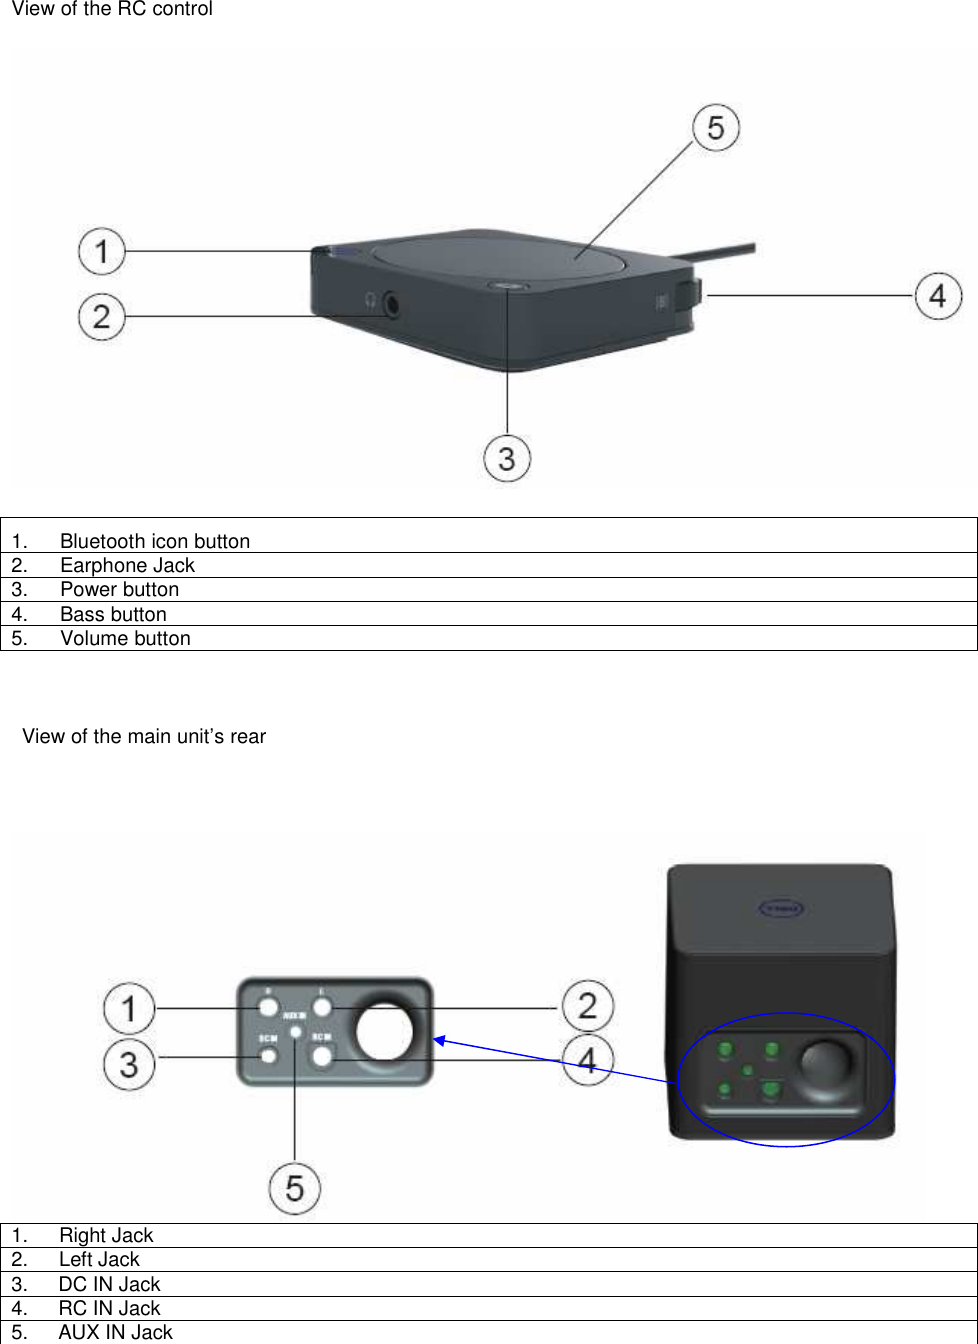  View of the RC control    1.  Bluetooth icon button 2.  Earphone Jack 3.  Power button 4.  Bass button 5.  Volume button     View of the main unit’s rear     1.      Right Jack 2.      Left Jack 3.    DC IN Jack 4.    RC IN Jack 5.    AUX IN Jack   